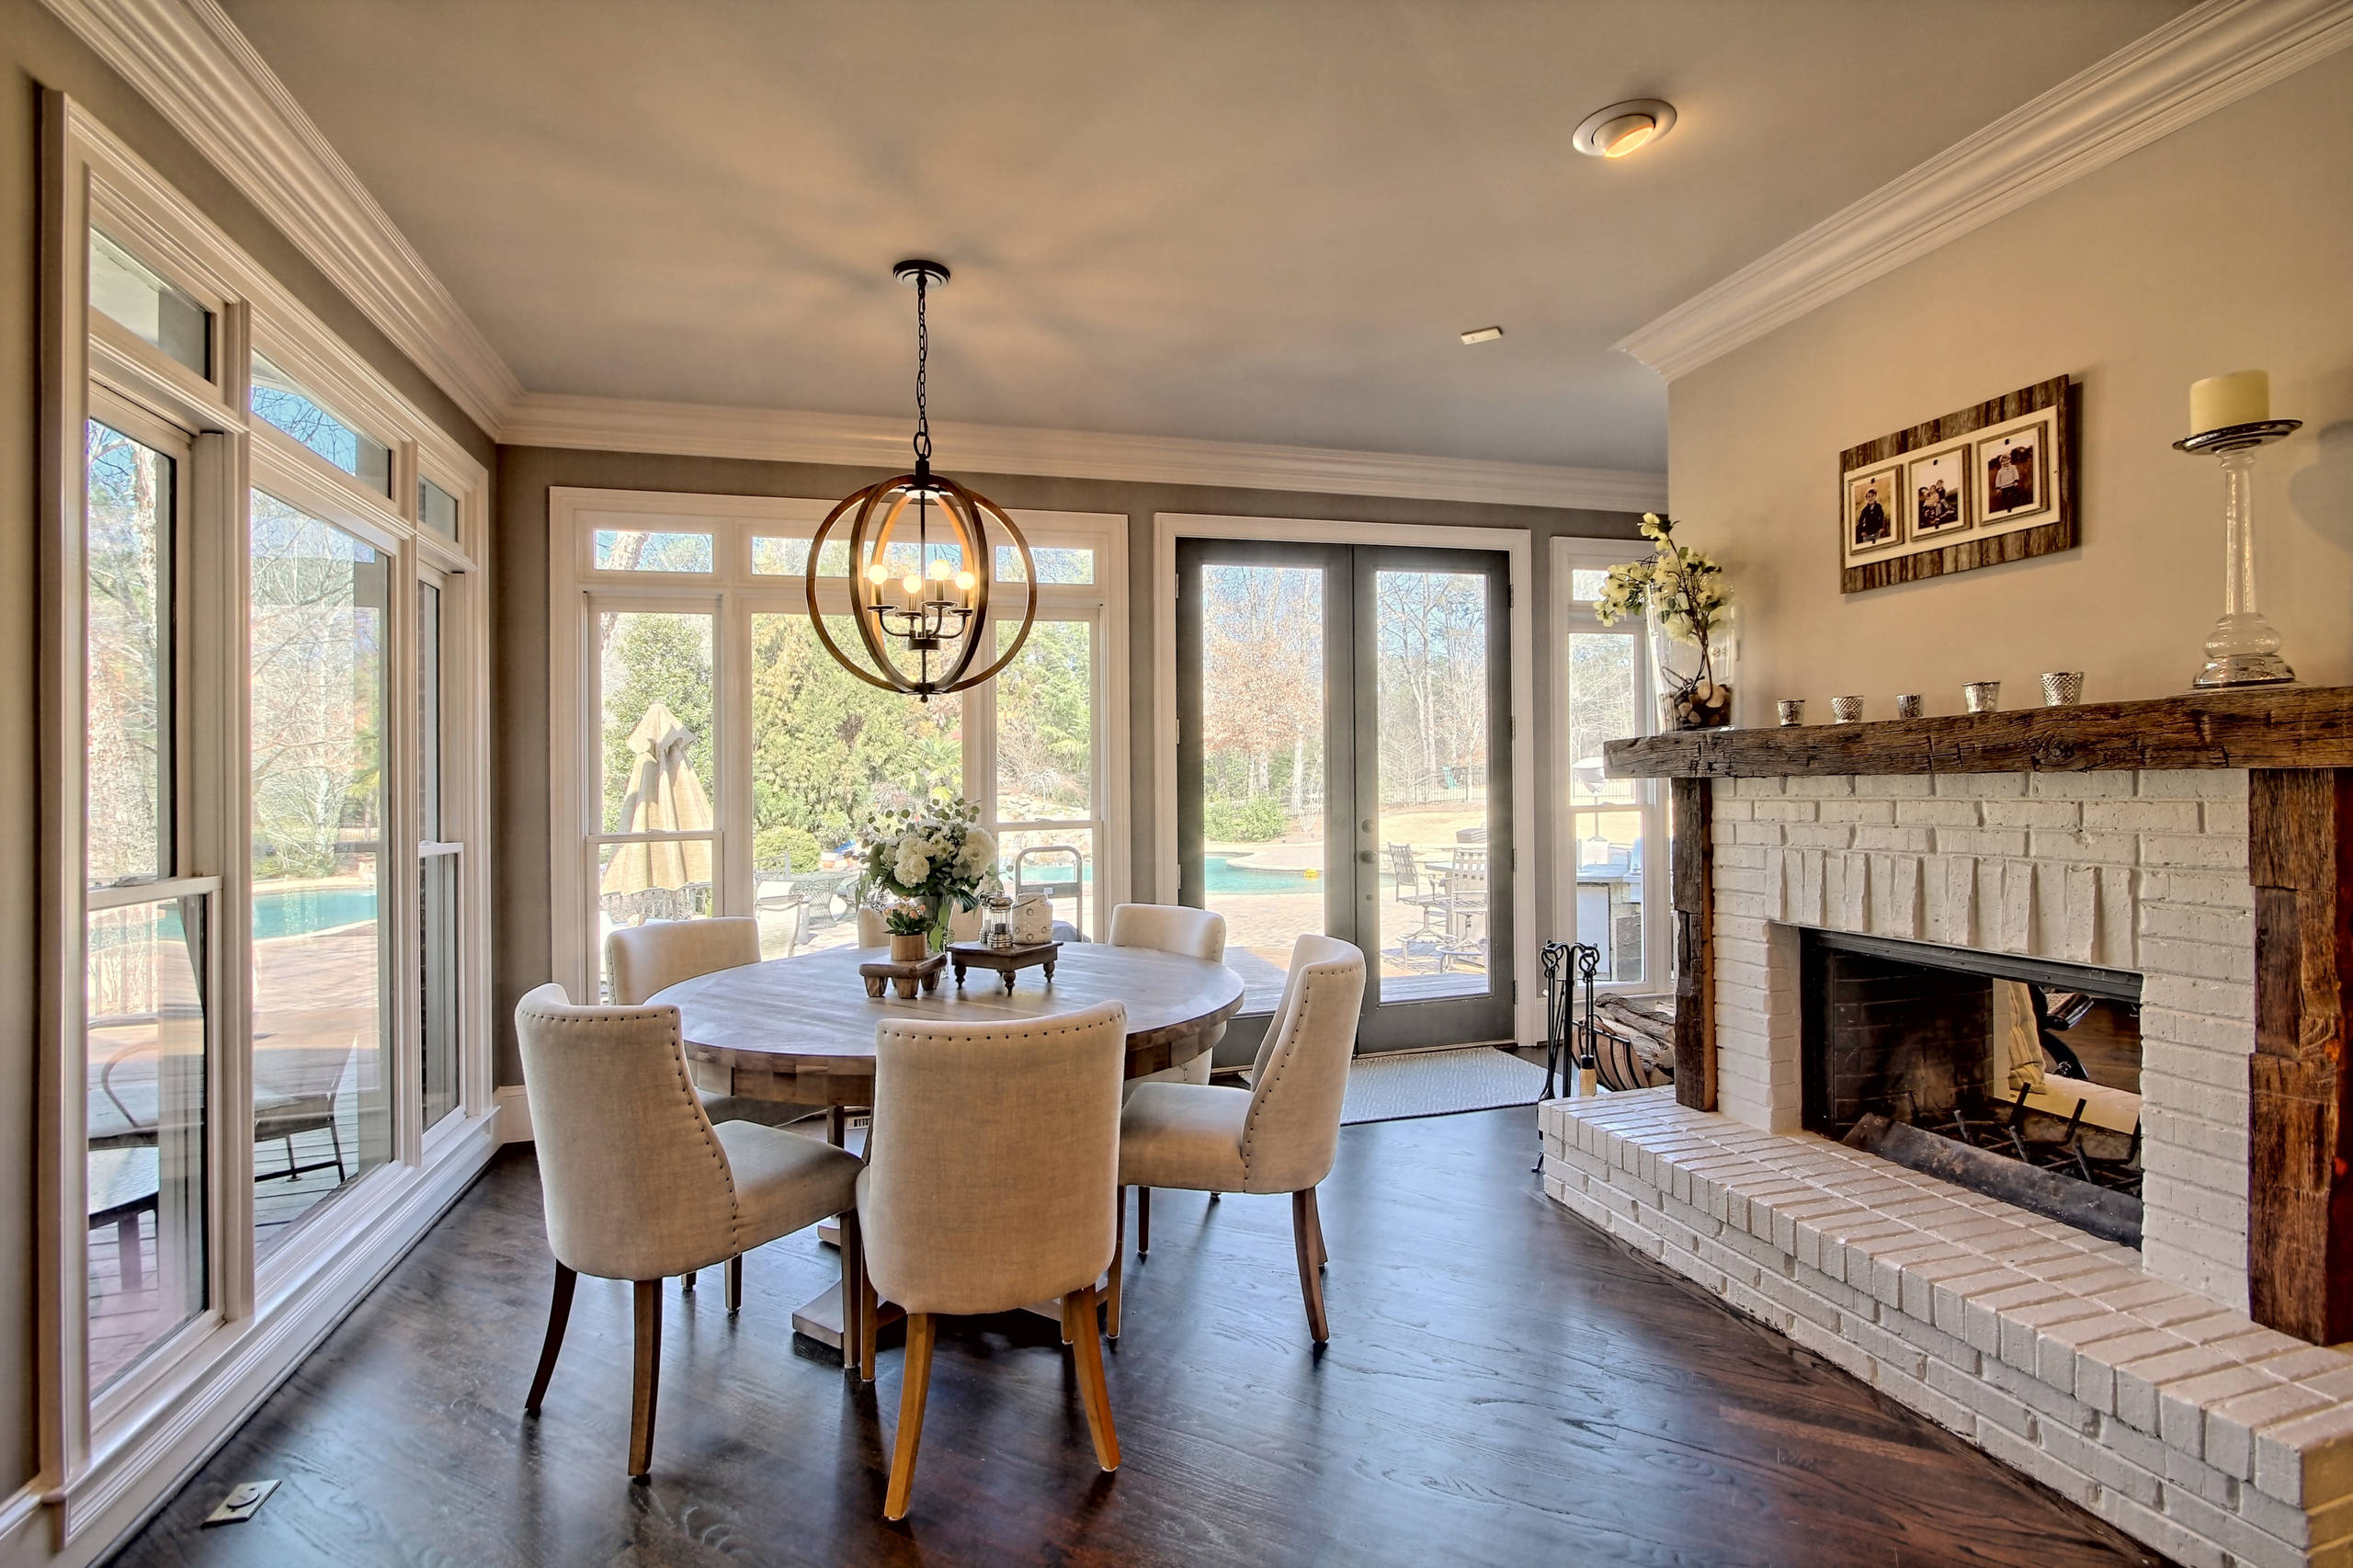 75 Dining Room with a Brick Fireplace Ideas You'll Love - October, 2023 |  Houzz